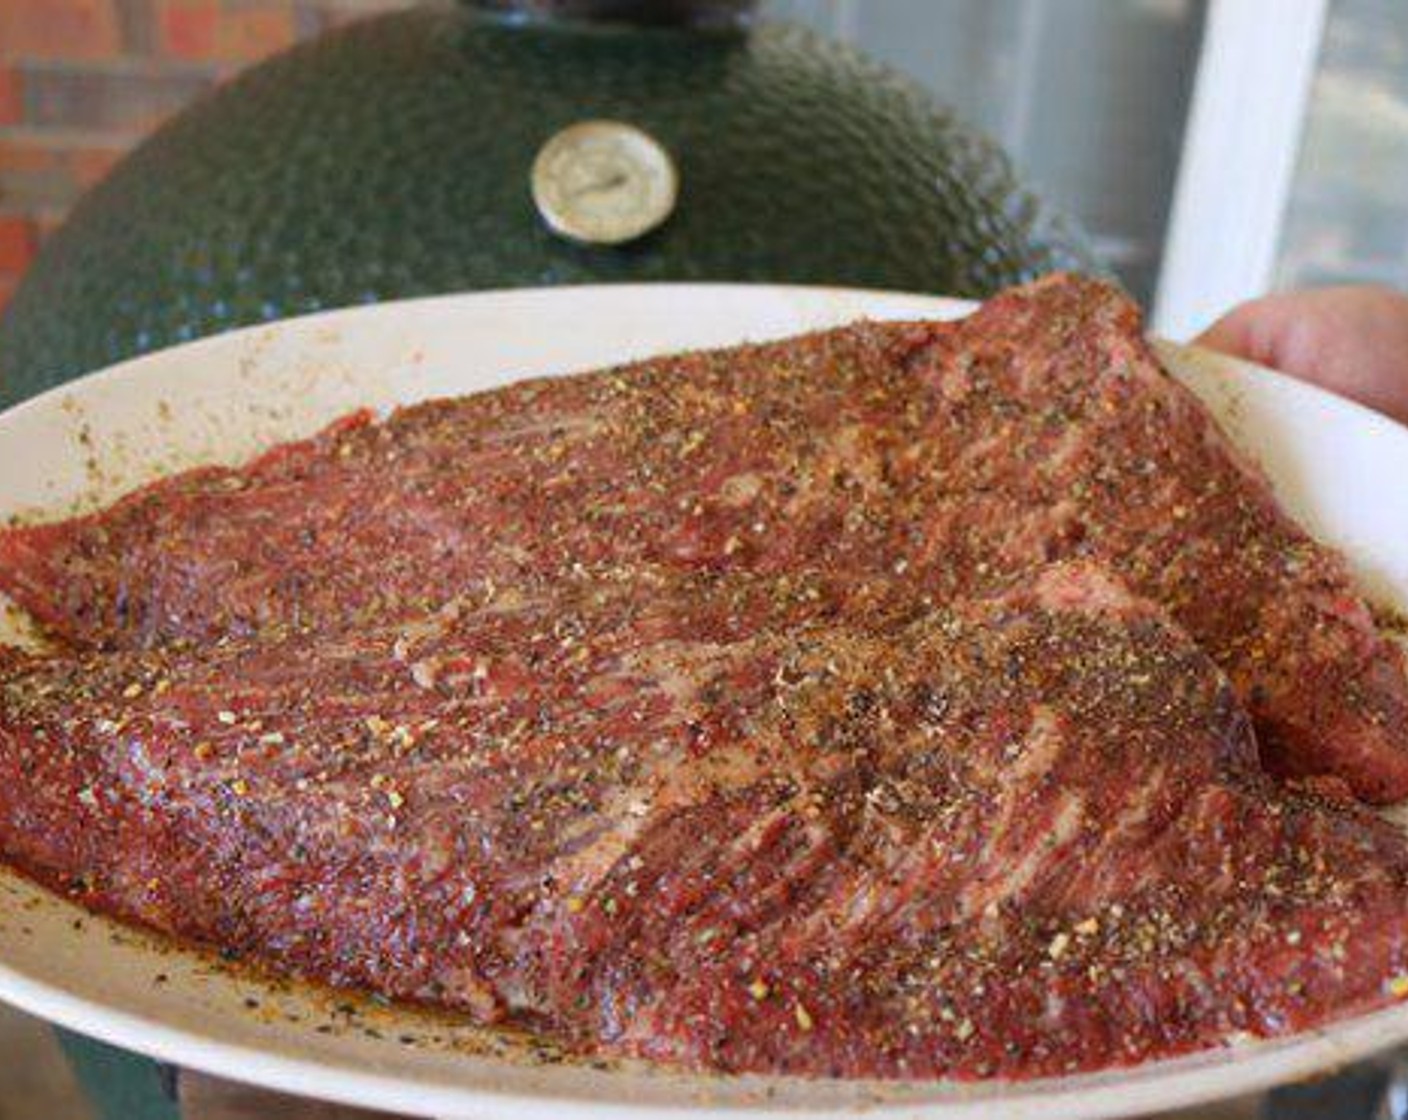 step 2 Season both sides with Steak Spice Rub (2 Tbsp). Rest for 1 hour on counter before grilling.